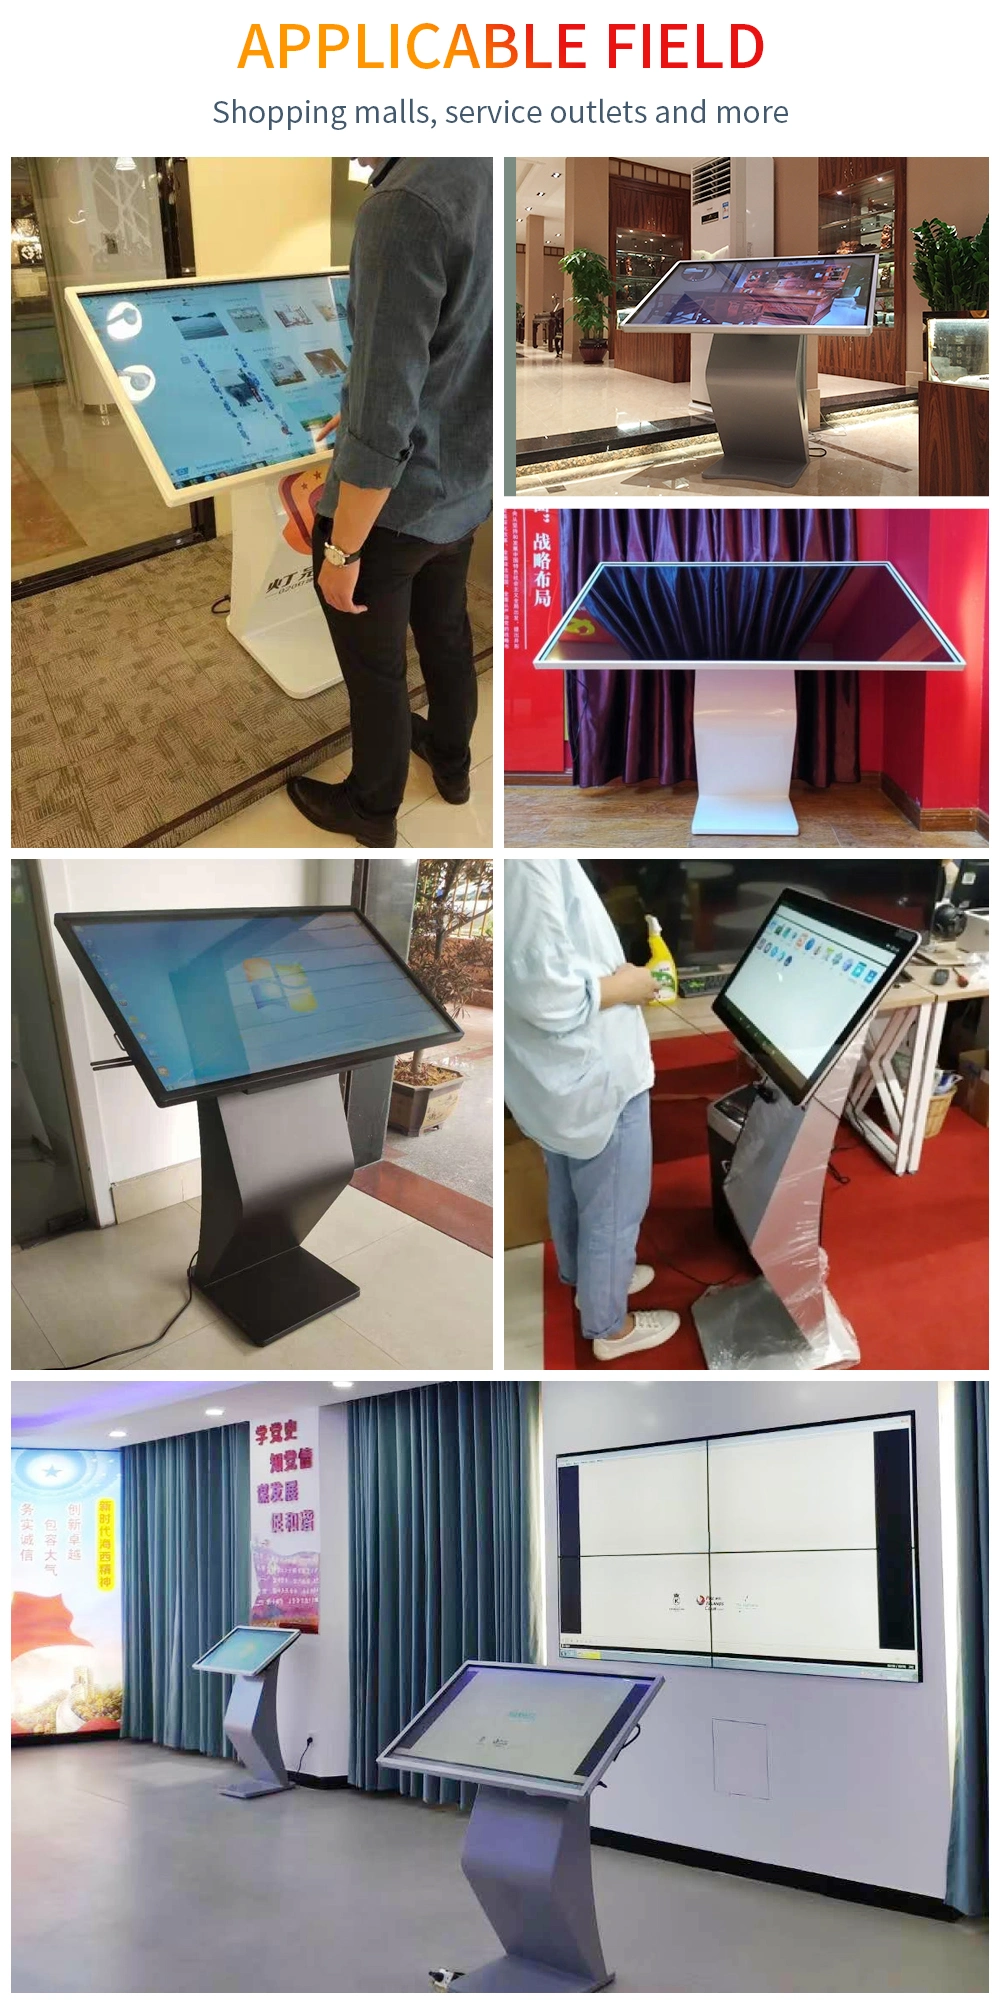 21.5 Inch LCD Pcap Touch Screen Table with Win 10 and WiFi